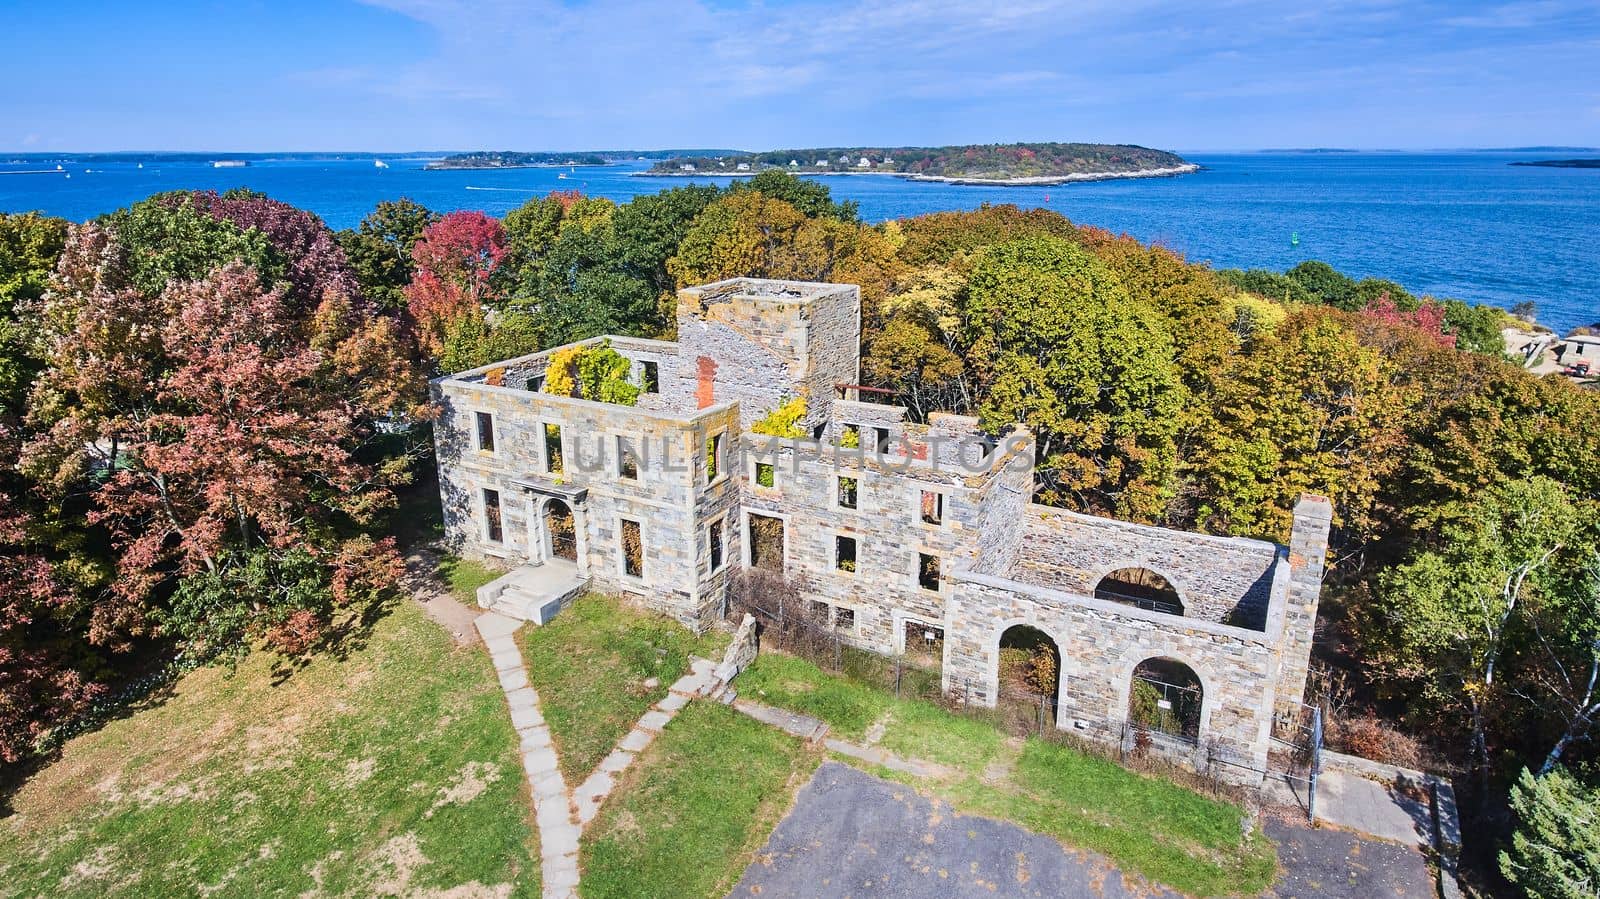 Image of Aerial over old abandoned stone structure in great condition with Maine ocean in background